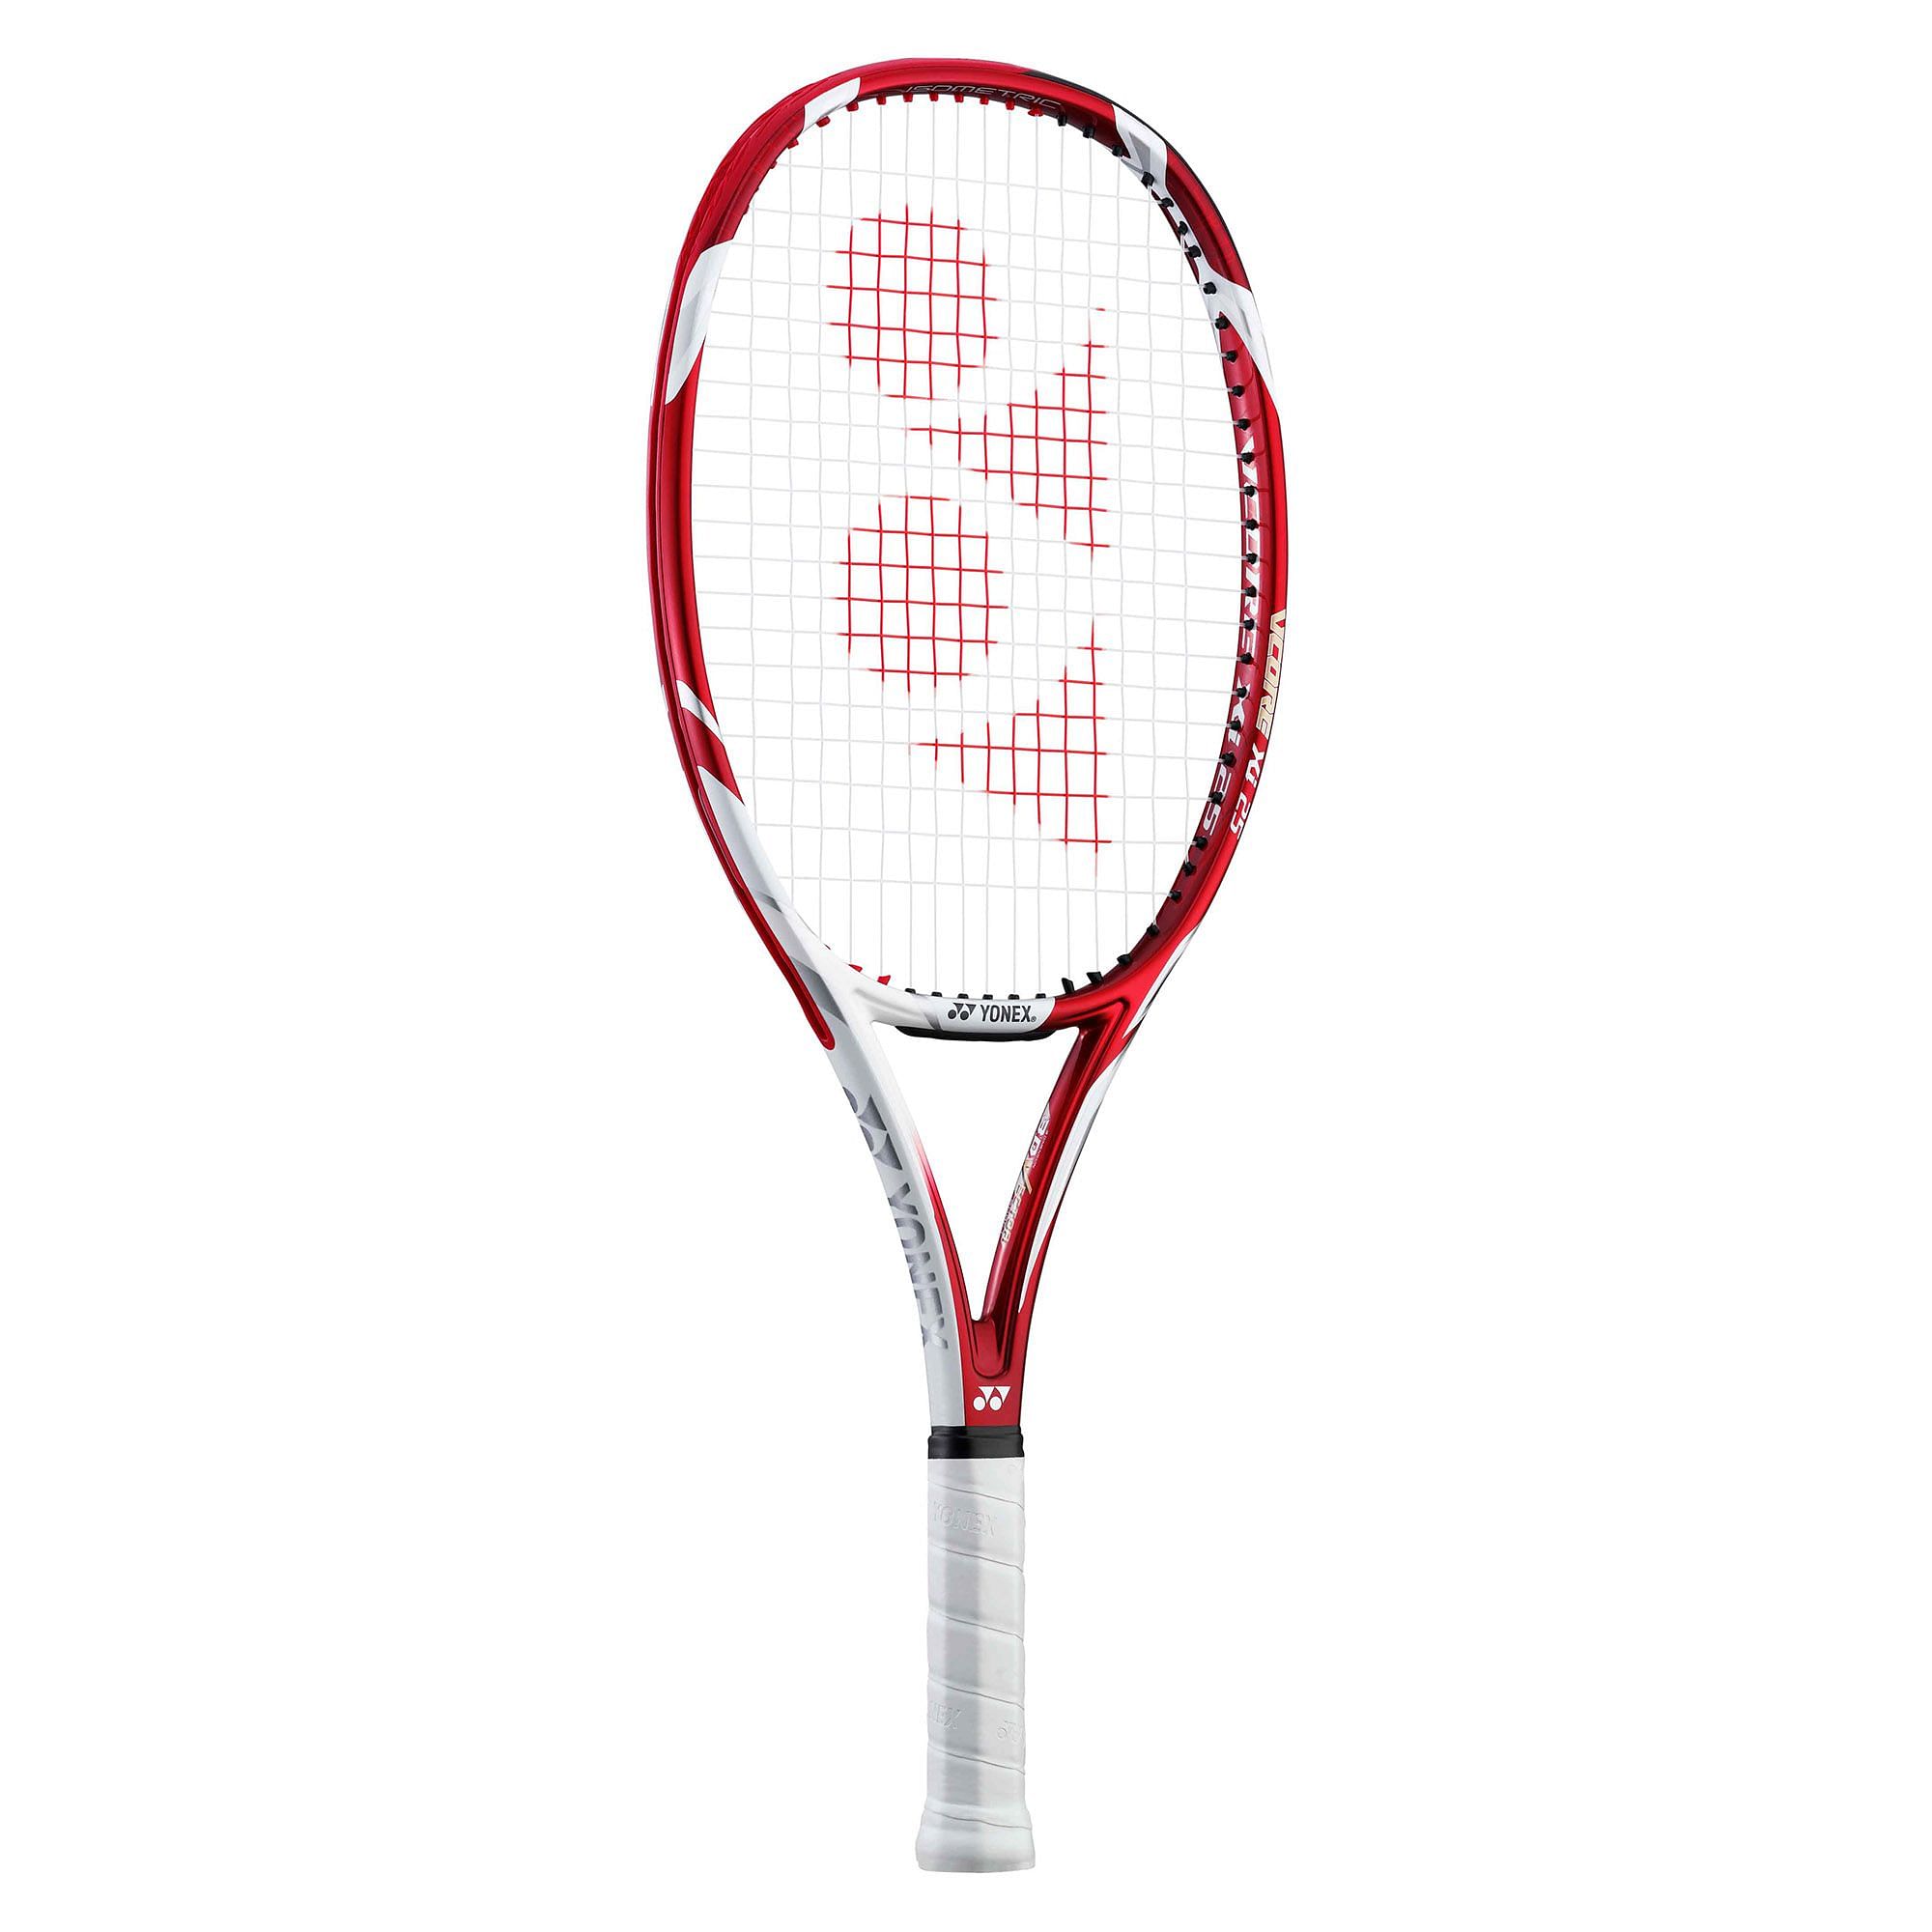 Racquet technology and the evolution of tennis